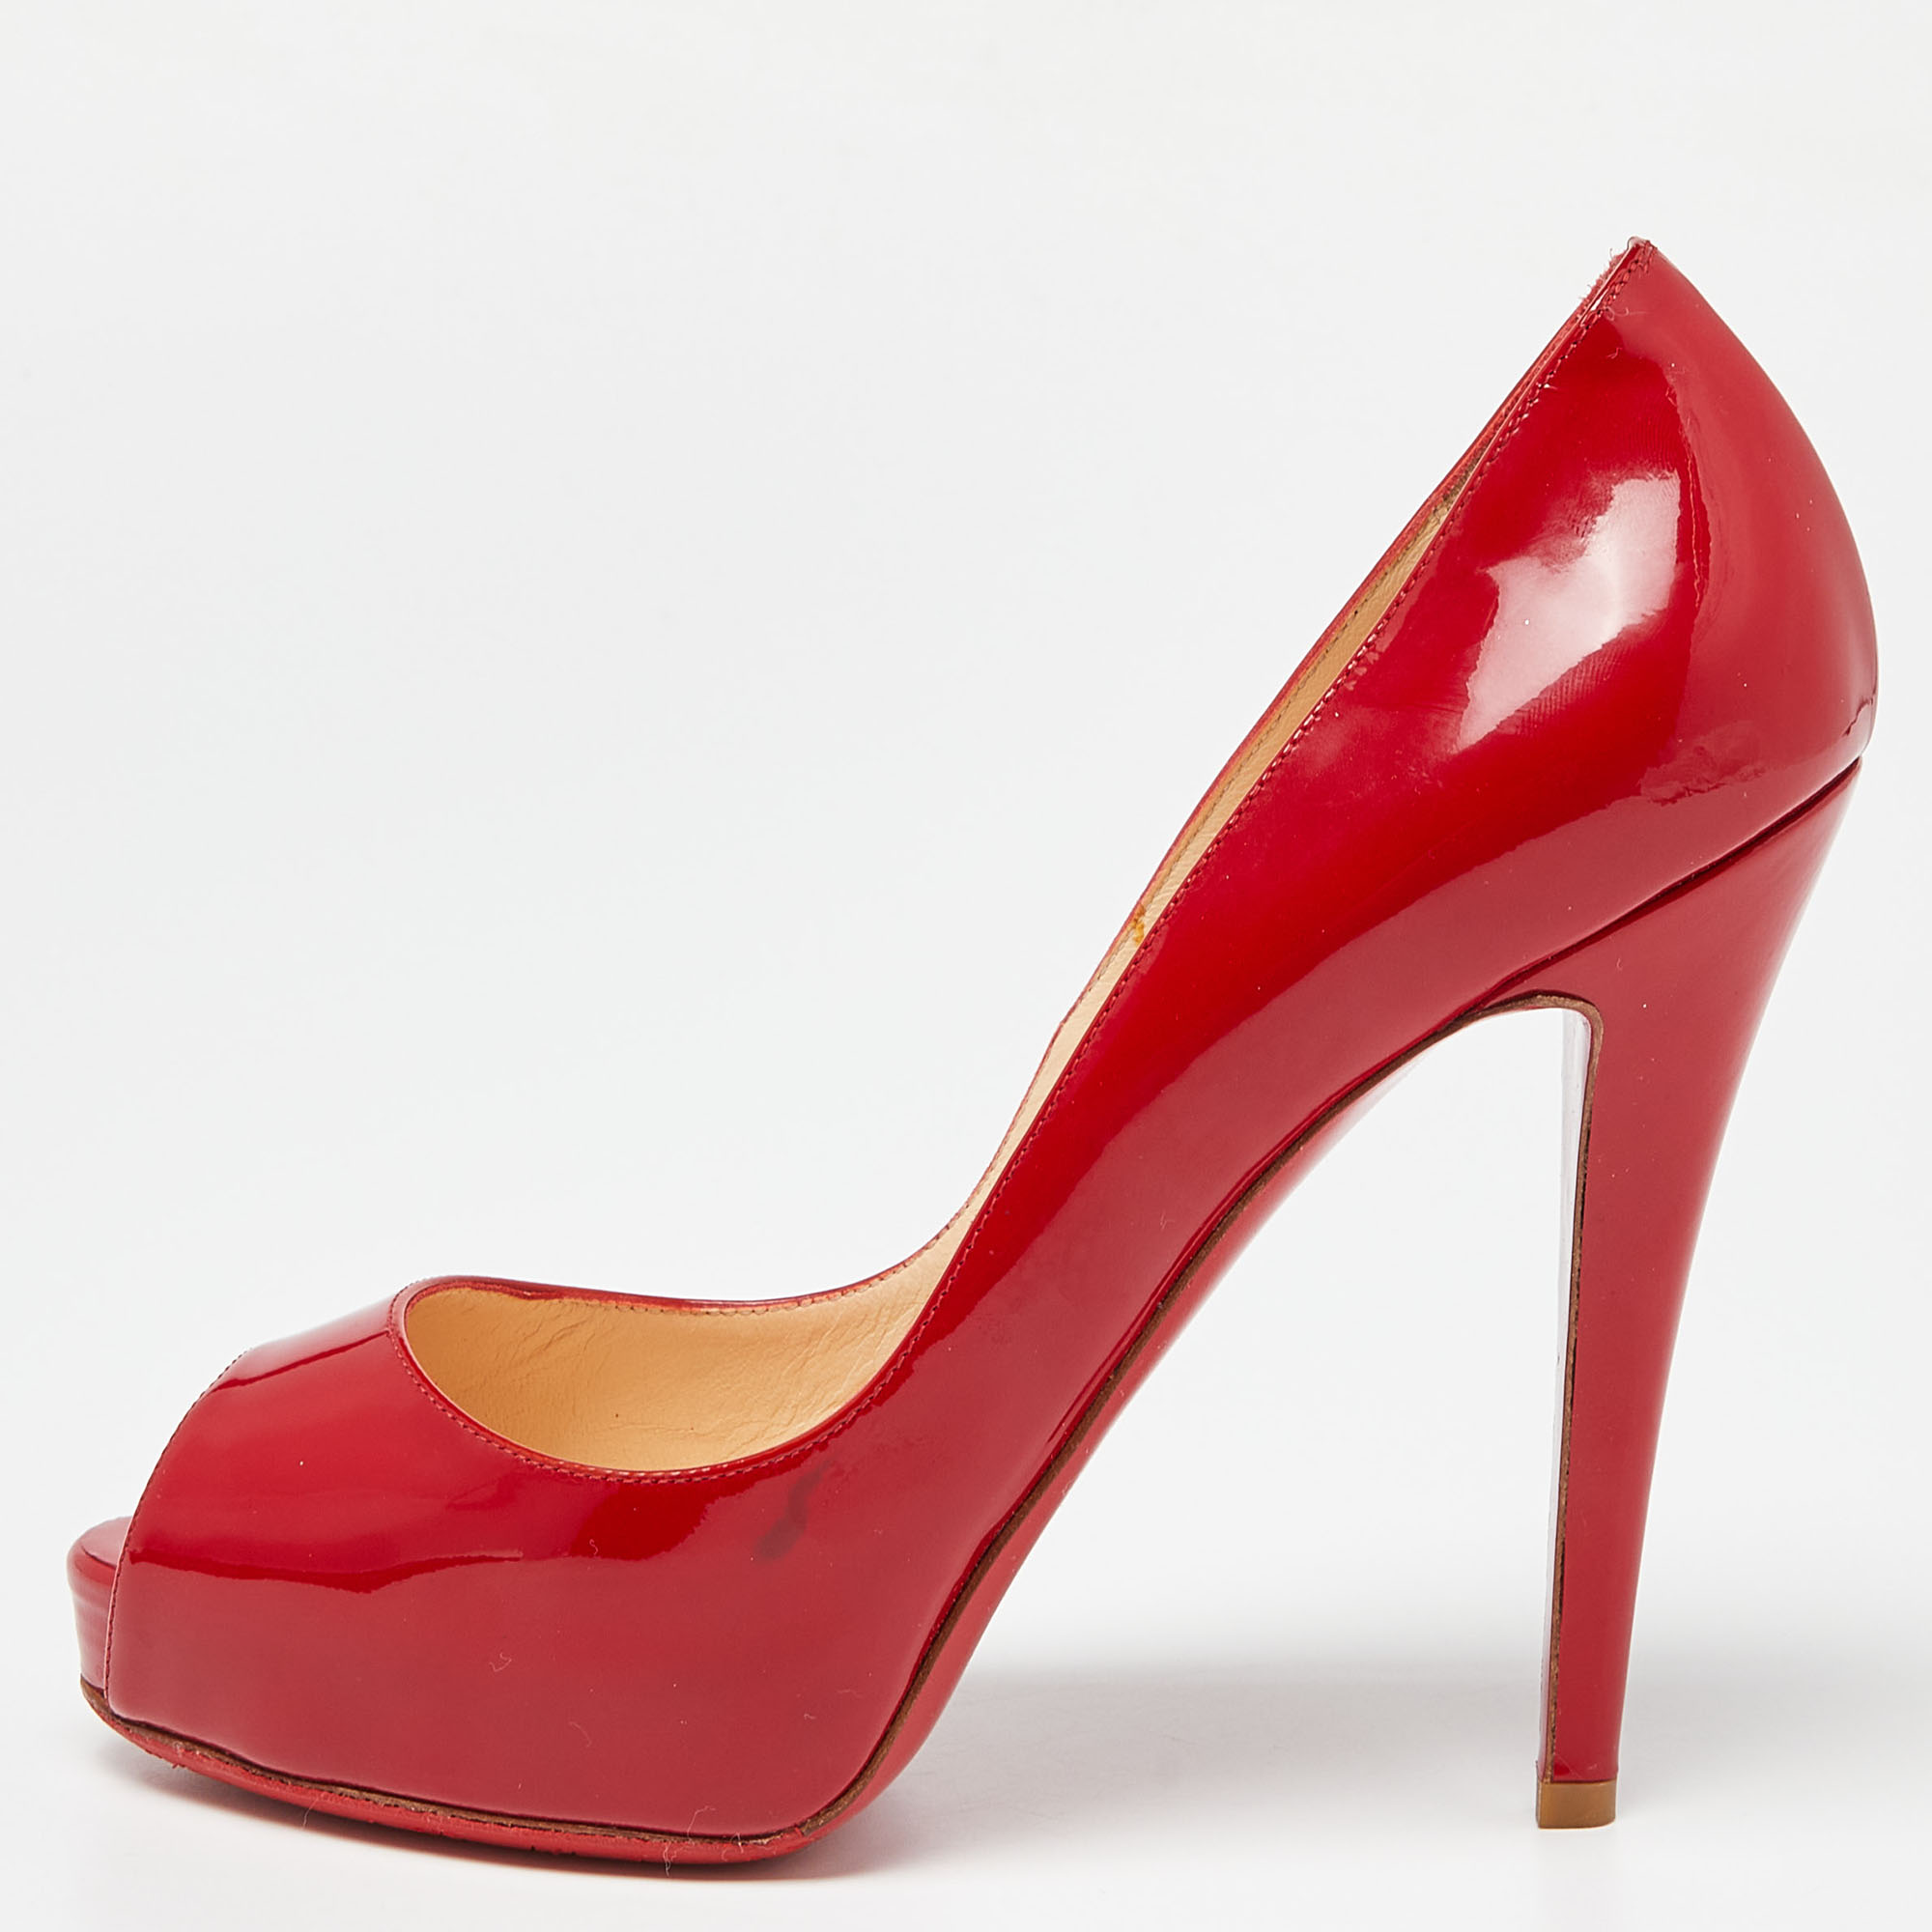 

Christian Louboutin Red Patent Leather Very Prive Platform Peep Toe Pumps Size